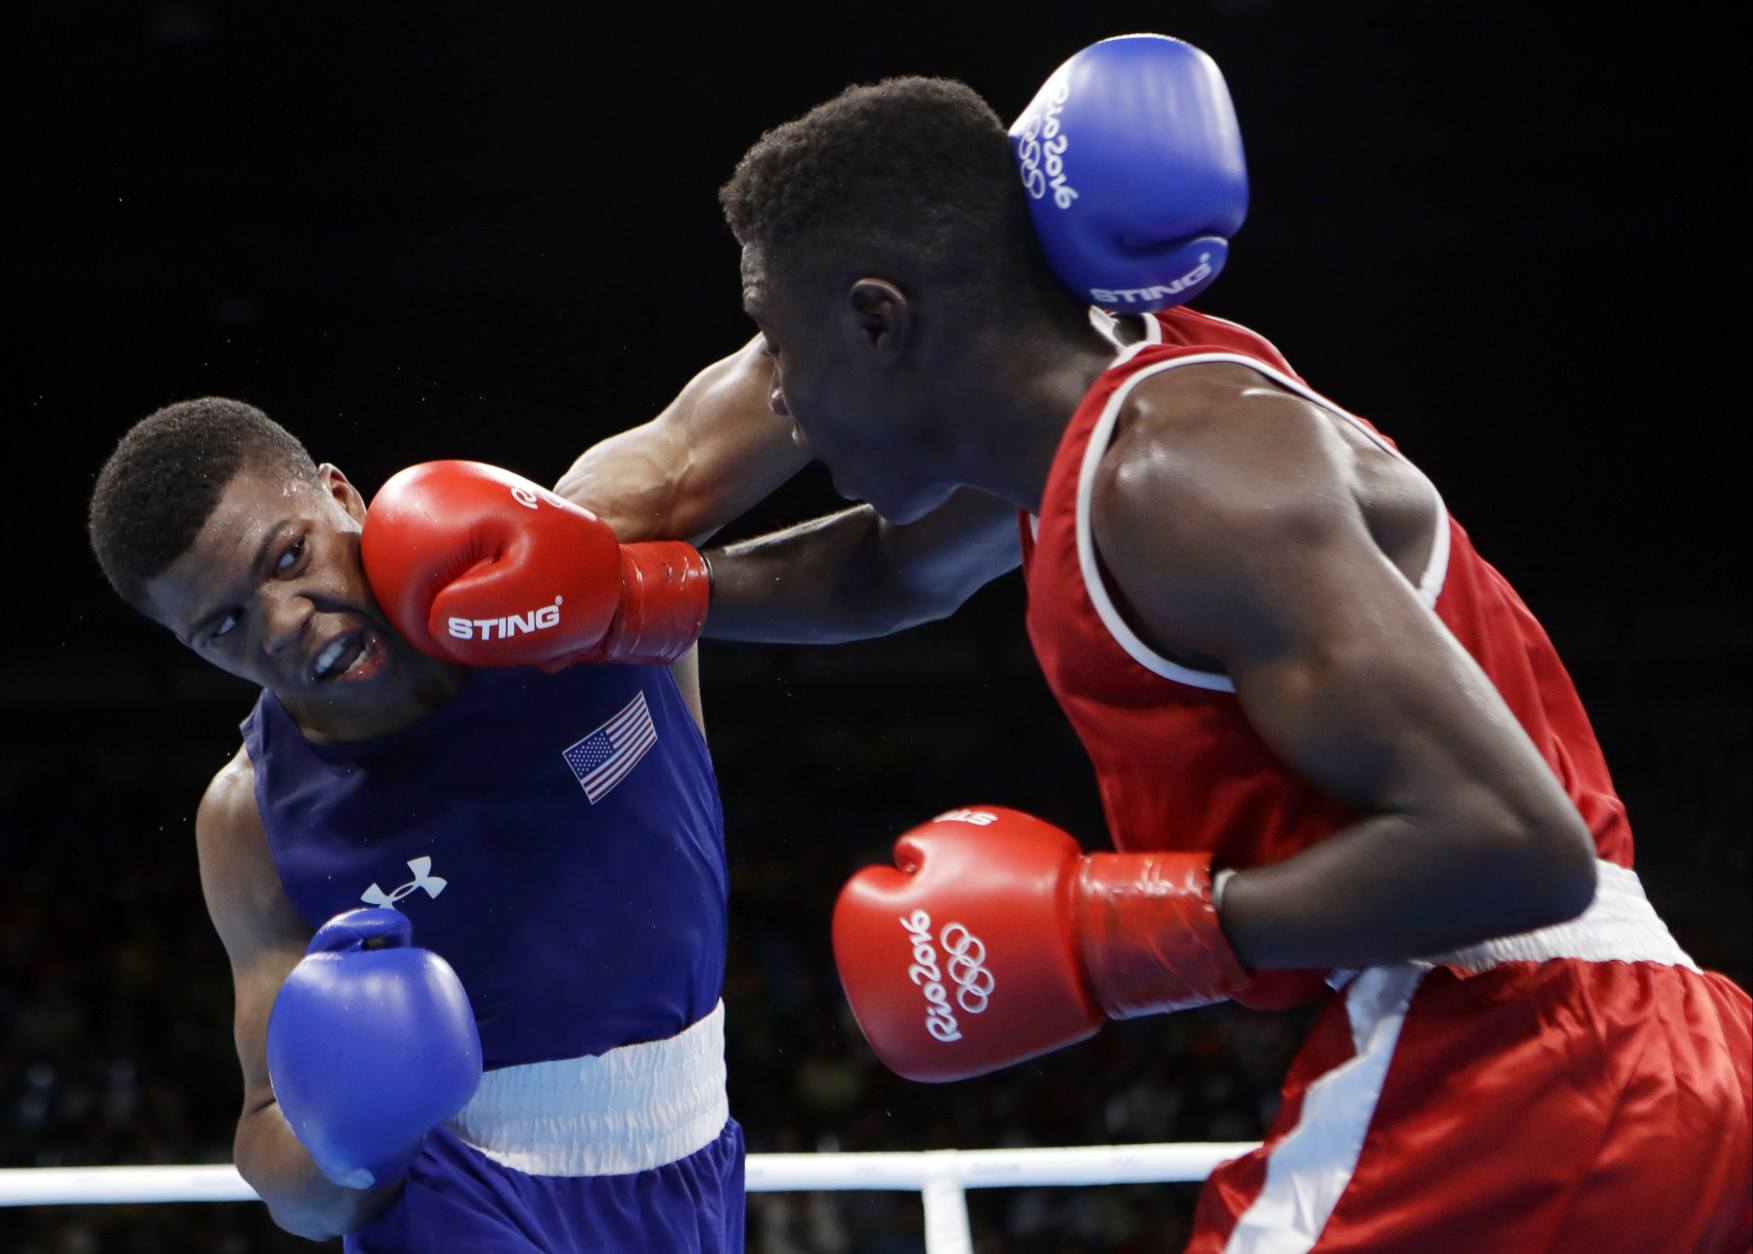 United State's Gary Russell, left, fights Haiti's Haiti's Richardson Hitchins during a men's light welterweight 64-kg preliminary boxing match at the 2016 Summer Olympics in Rio de Janeiro, Brazil, Wednesday, Aug. 10, 2016. (AP Photo/Frank Franklin II)